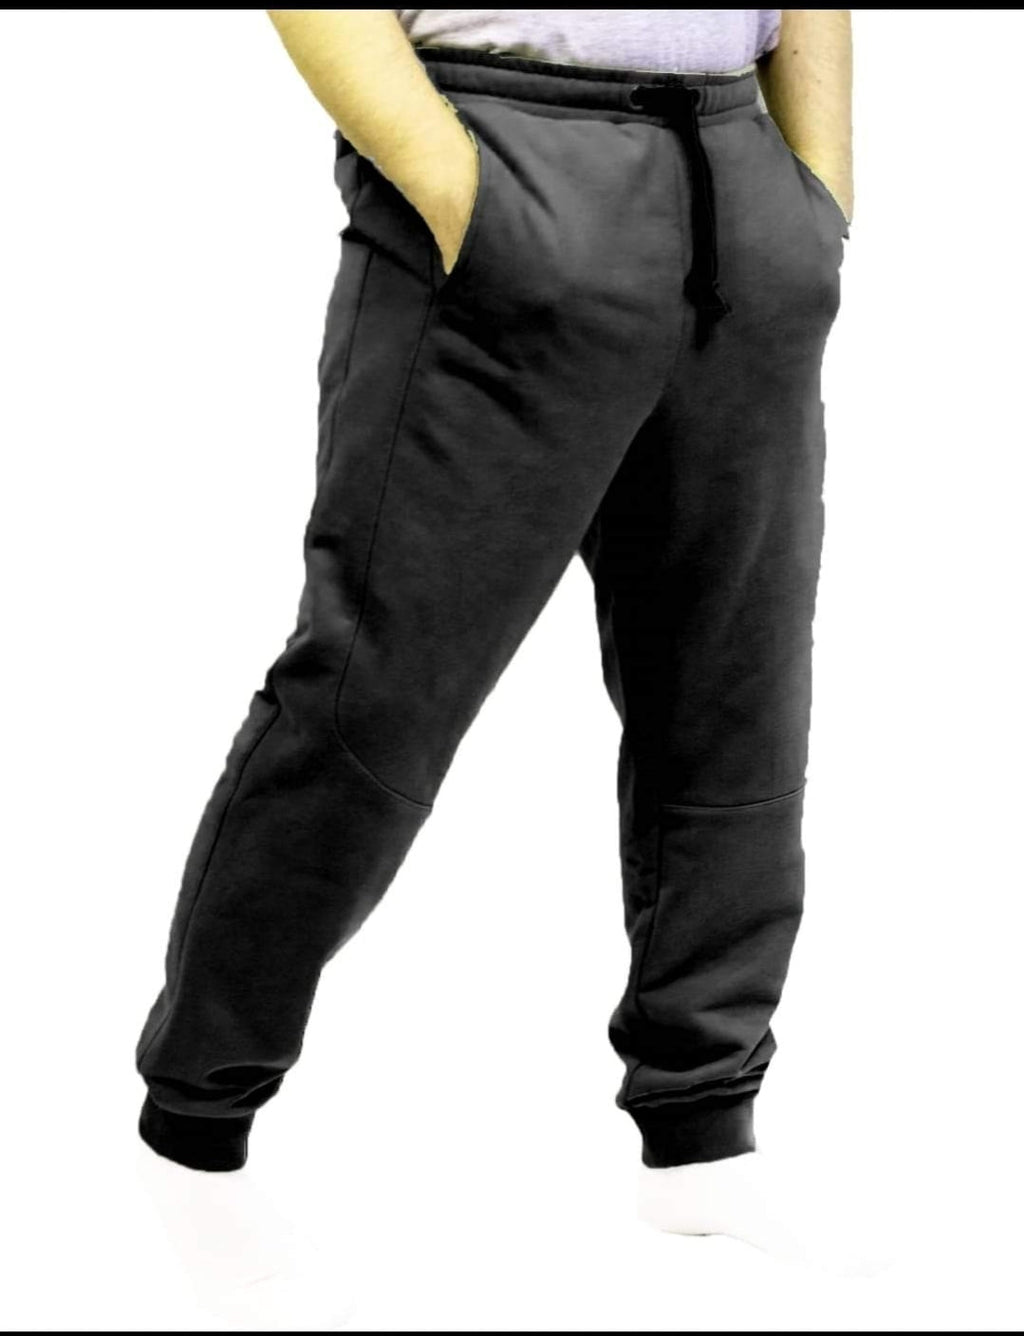 Solid Charcoal Grey Joggers and Lounge Pants - Smarty Pants Boutique NH